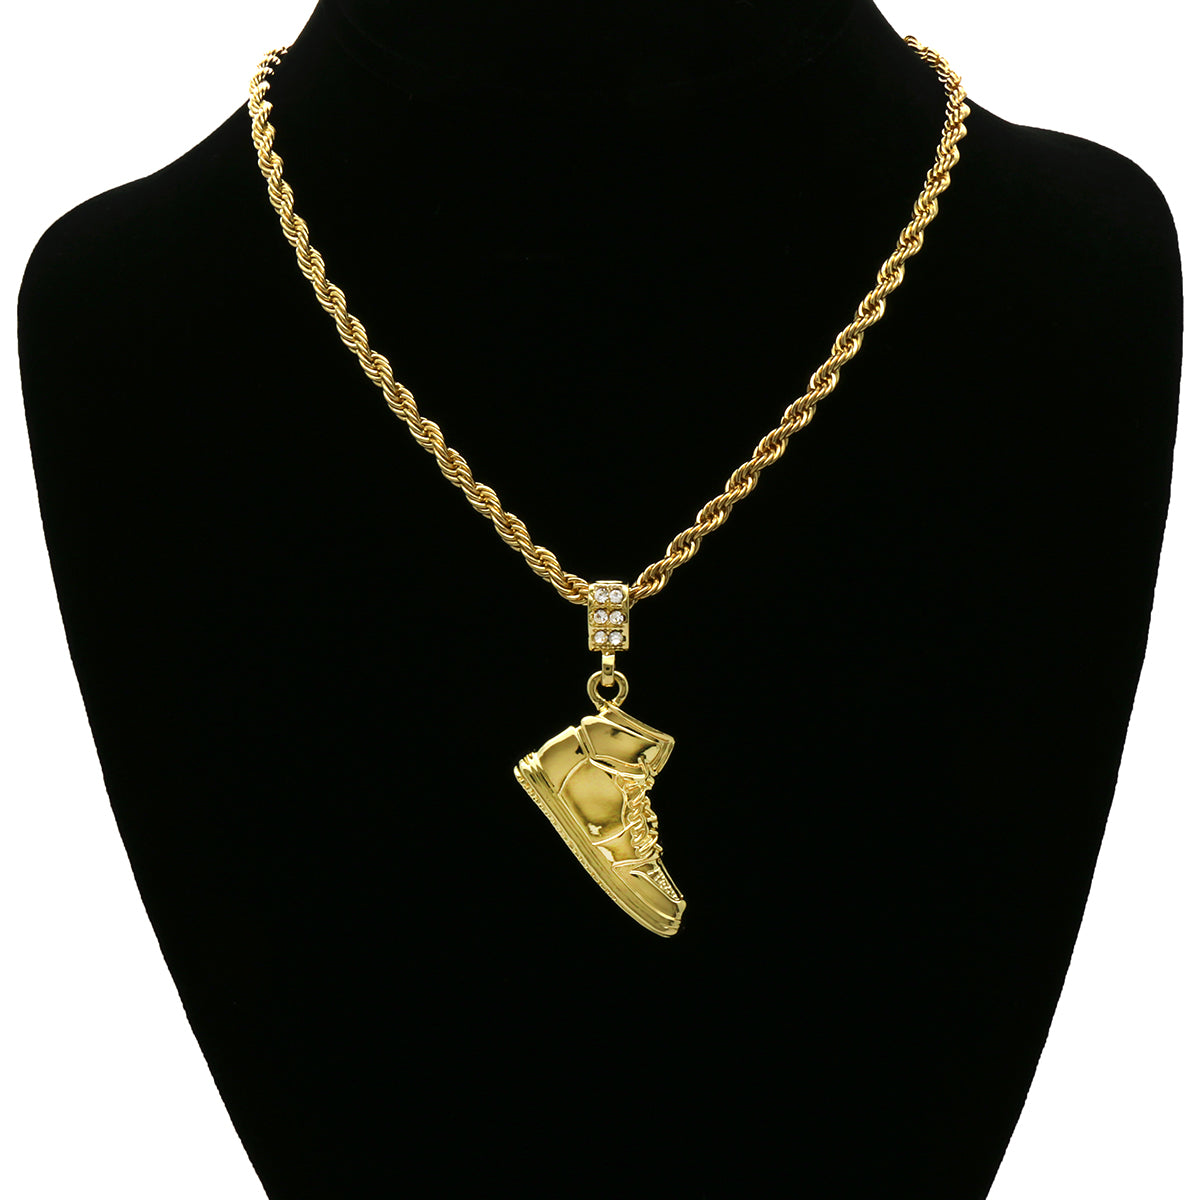 14K GOLD PLATED RETRO 1 PENDANT WITH GOLD ROPE CHAIN